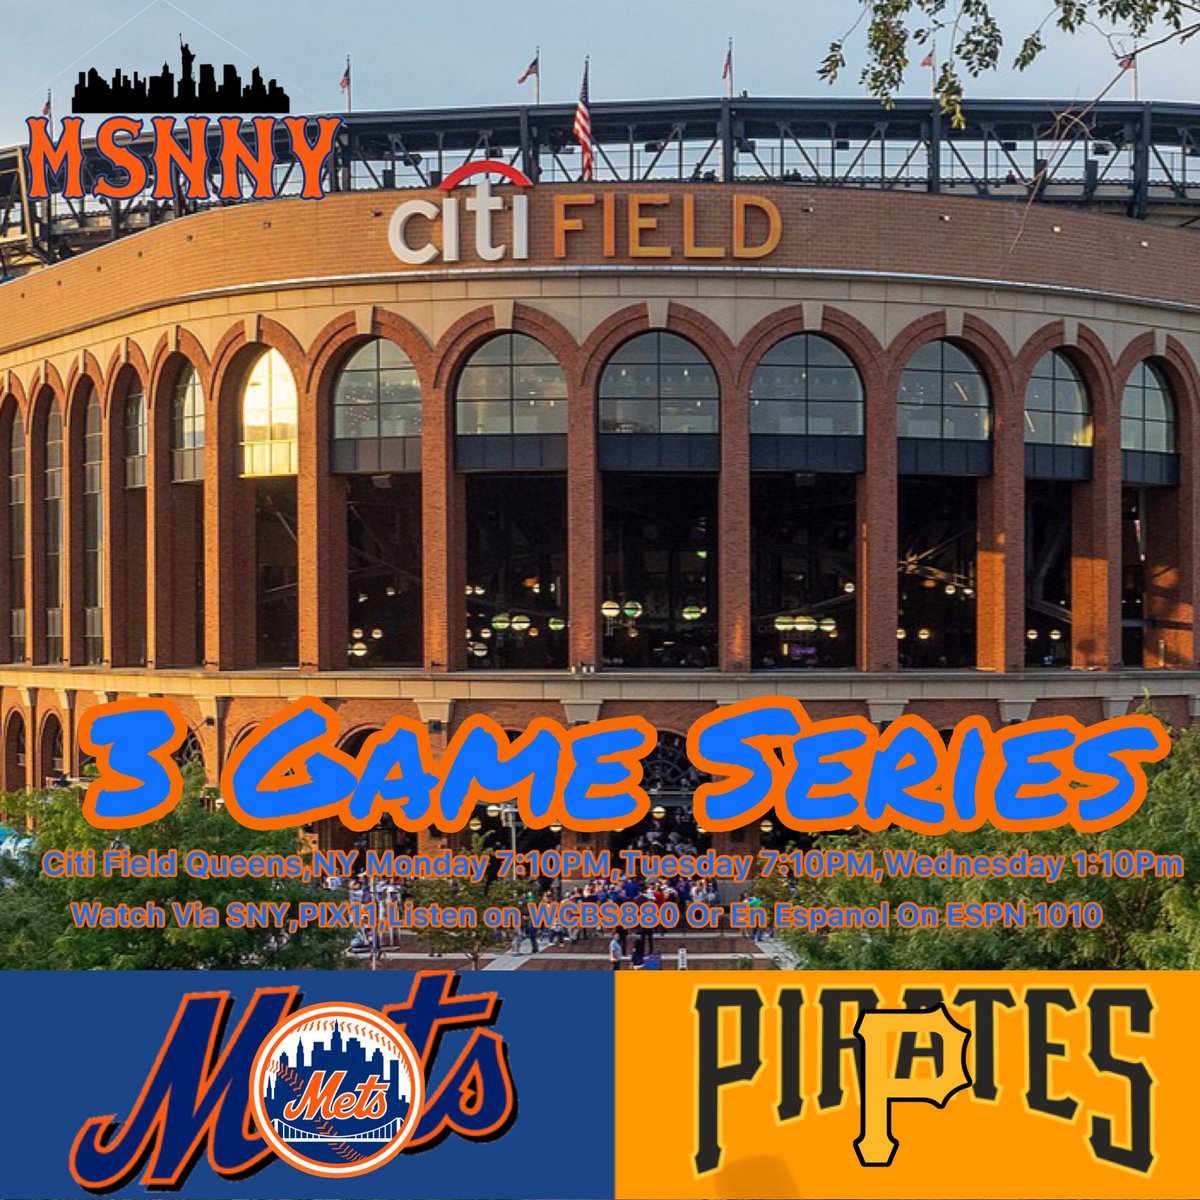 Today Begins a 3 Game Series In Queens Between the @Mets and @Pirates #LGM #NYM #MetsVsPirates #PeteAlonso #AndrewMcCutchen #Mets #LFGM #Queens #NYC